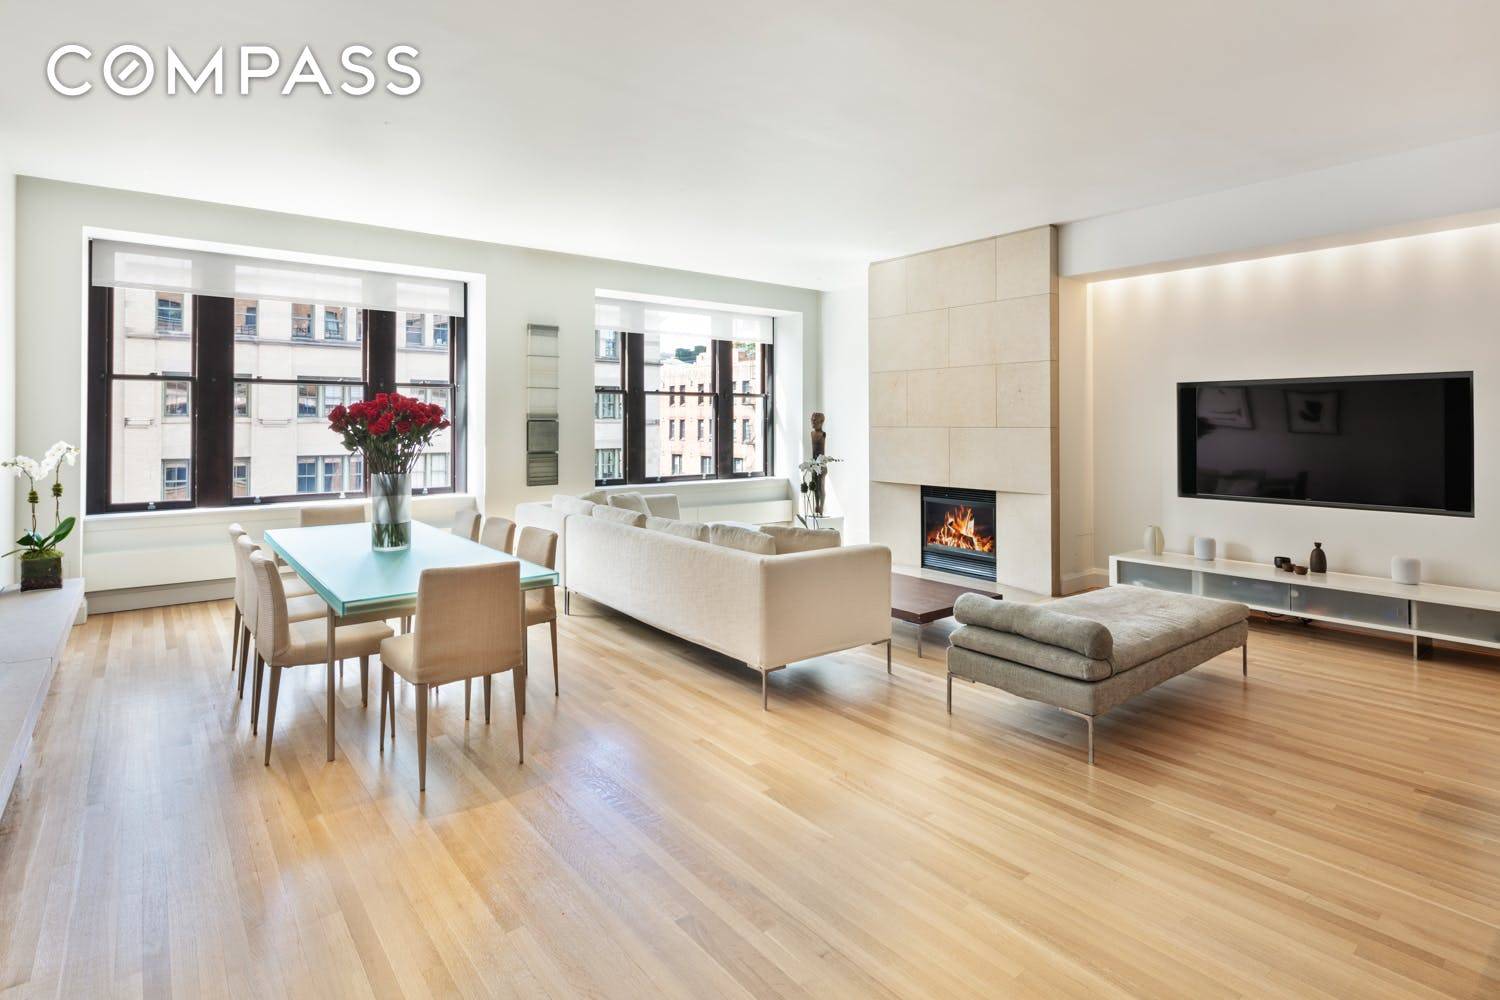 No detail nor expense were spared in this truly bespoke TriBeCa loft, newly renovated to mint condition.